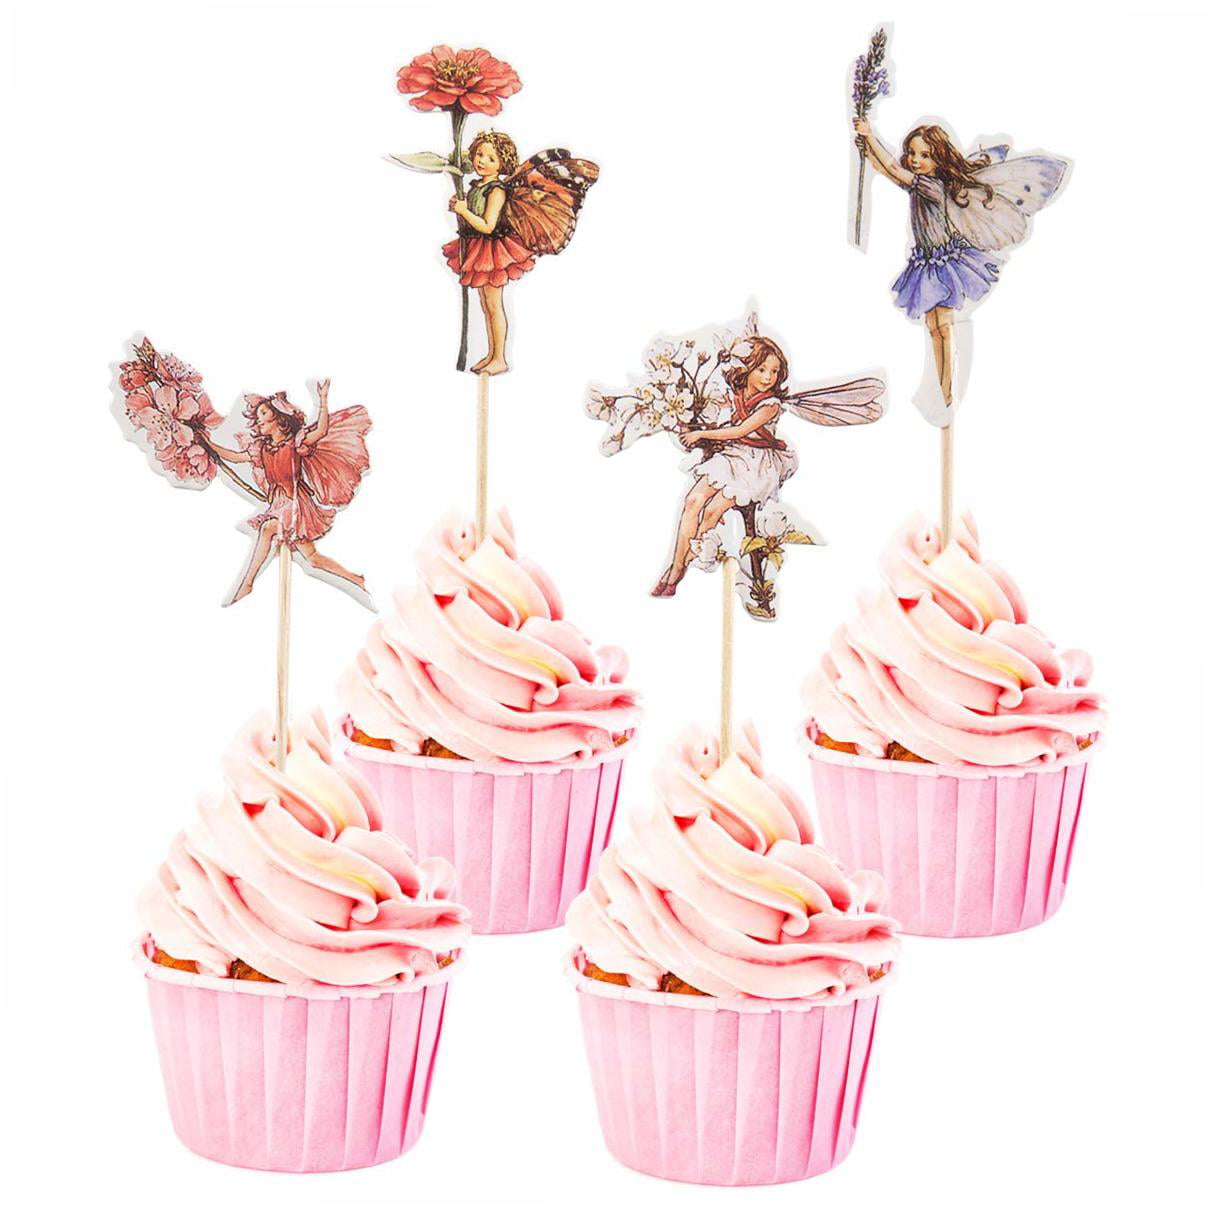 48 MINI CHRISTMAS ELVES CUPCAKE TOPPERS ICED ICING FAIRY CAKE BUN TOPPERS 